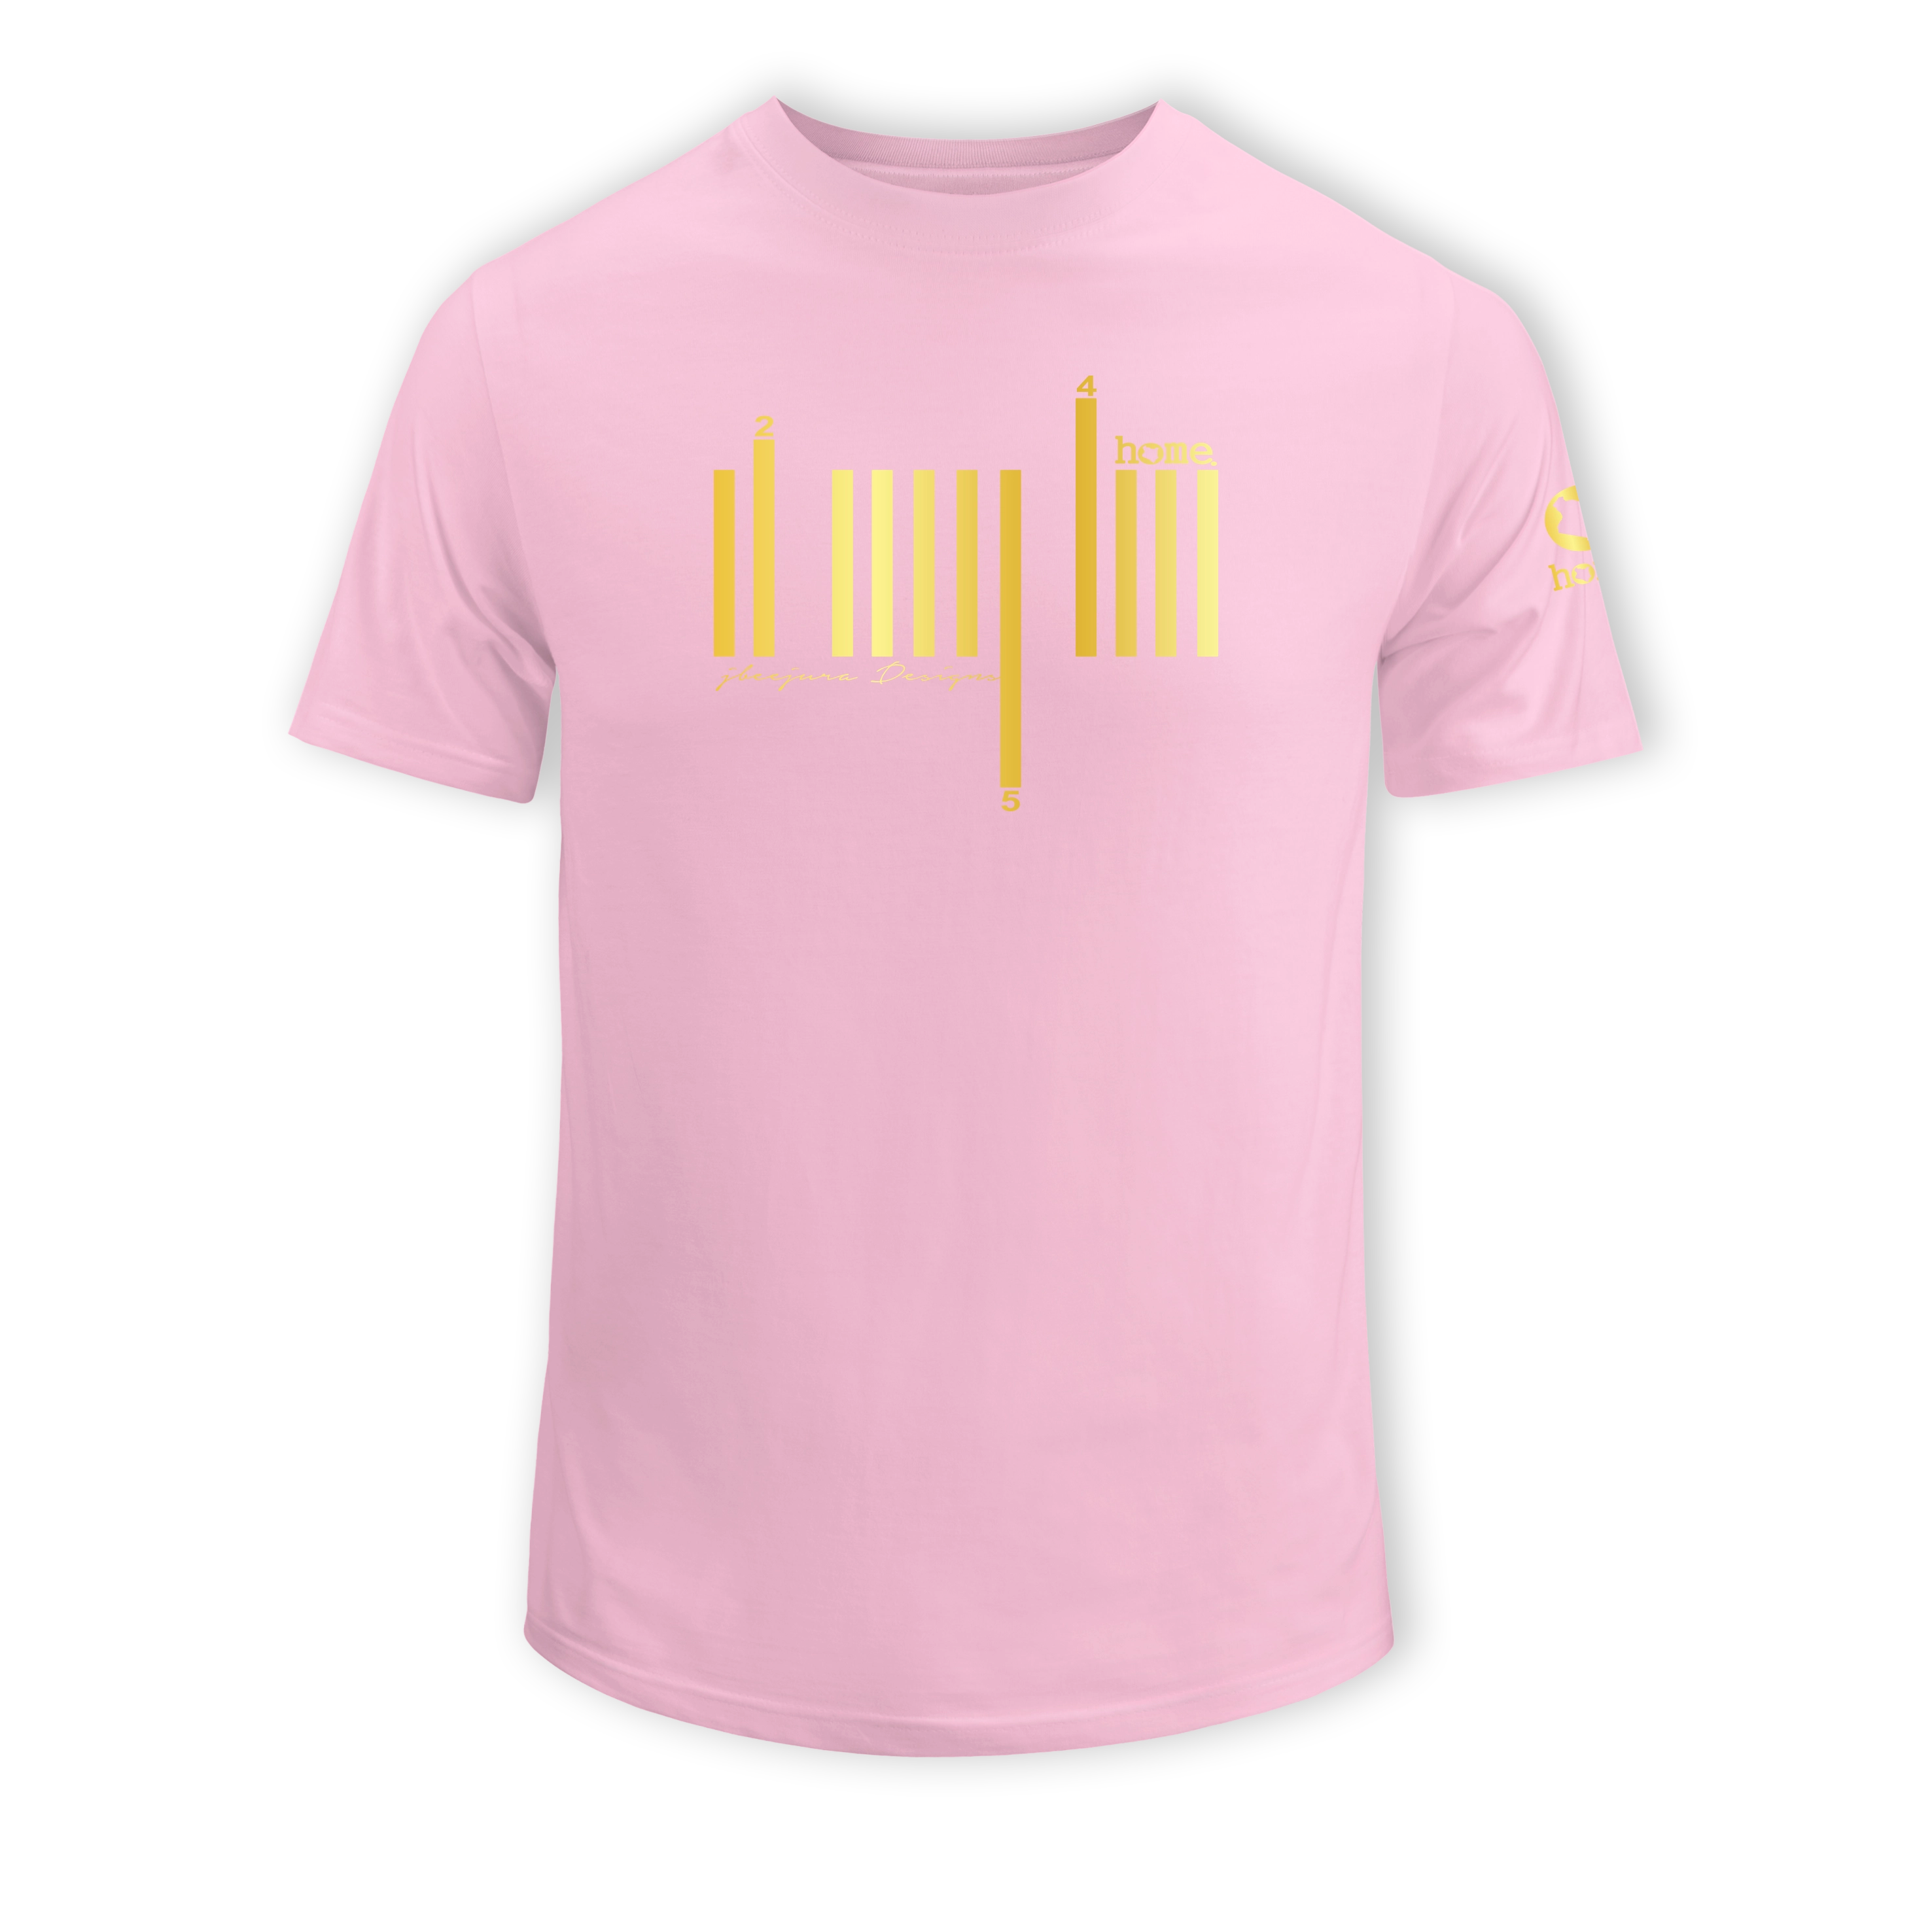 home_254 KIDS SHORT-SLEEVED PINK T-SHIRT WITH A GOLD BARS PRINT – COTTON PLUS FABRIC